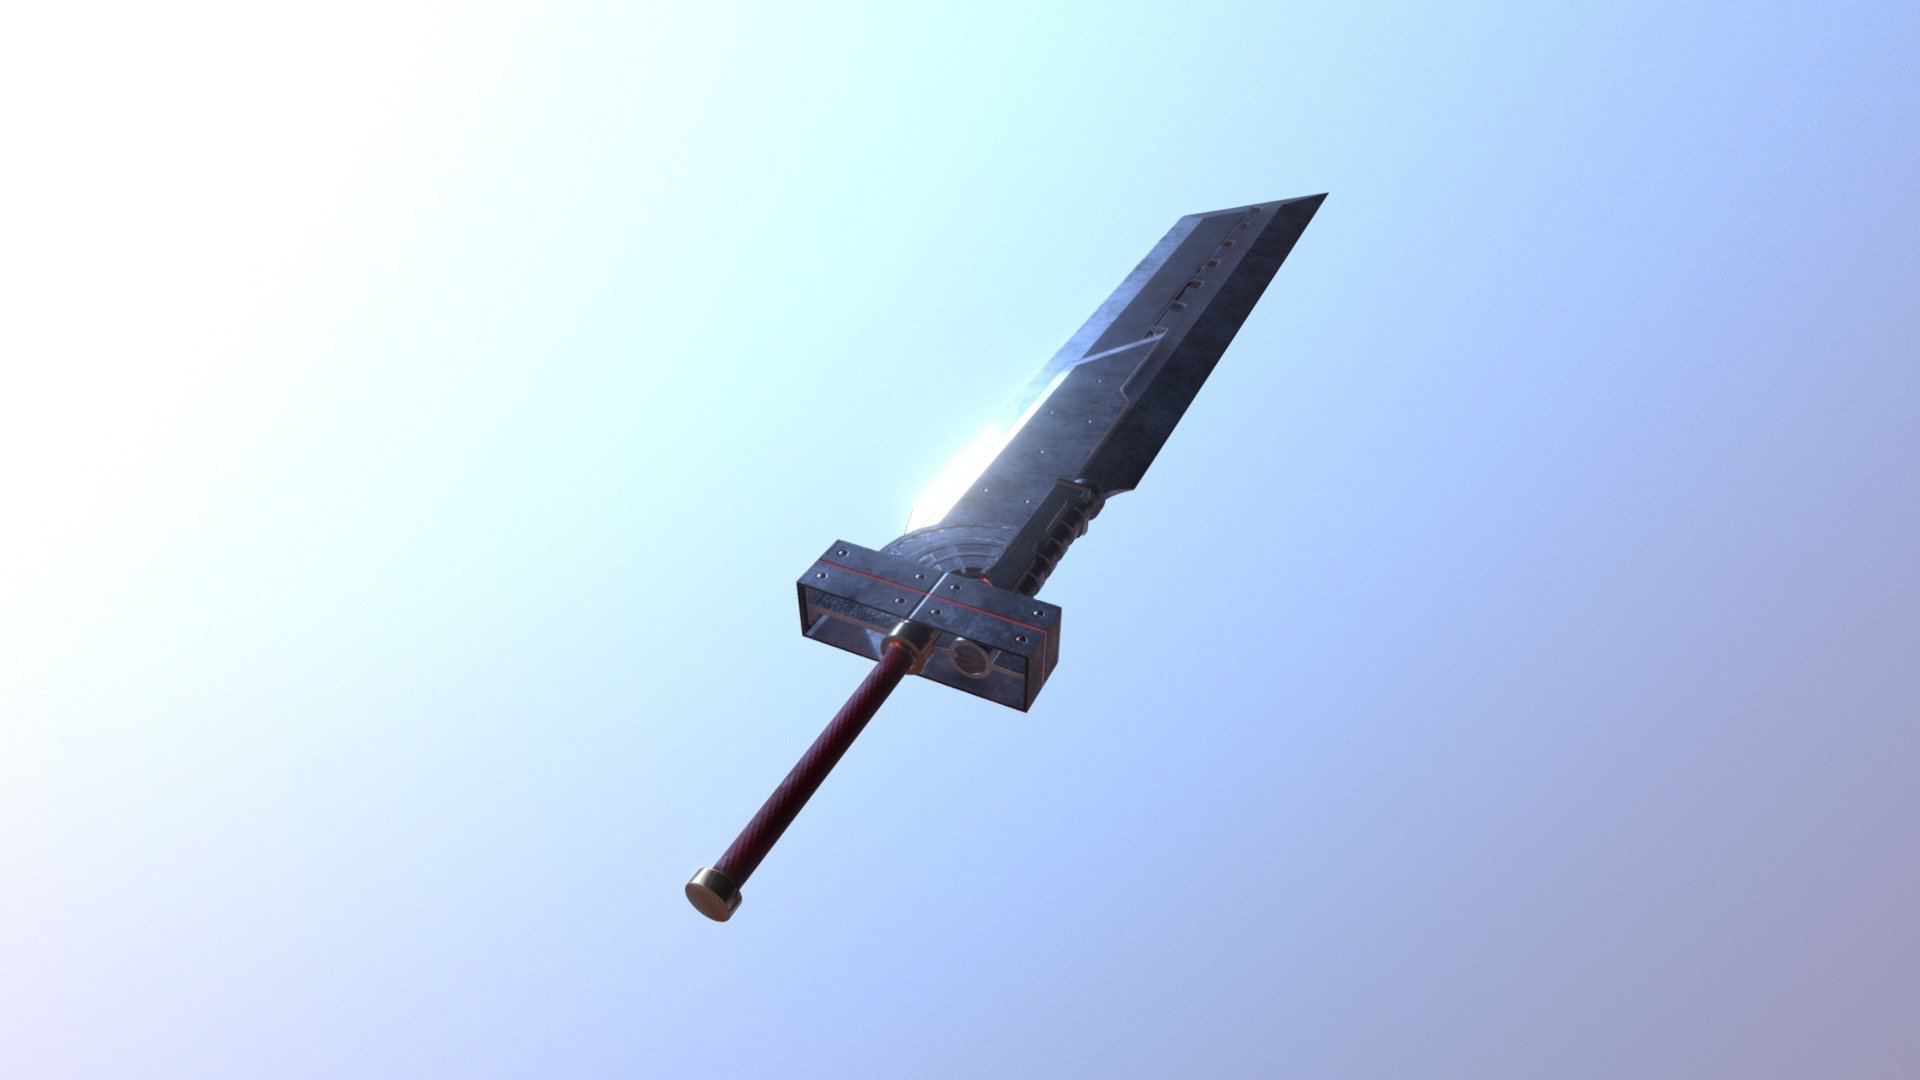 Fusion Sword From Final Fantasy Download Free 3d Model By Git4life Git4life 05c5d37 Sketchfab